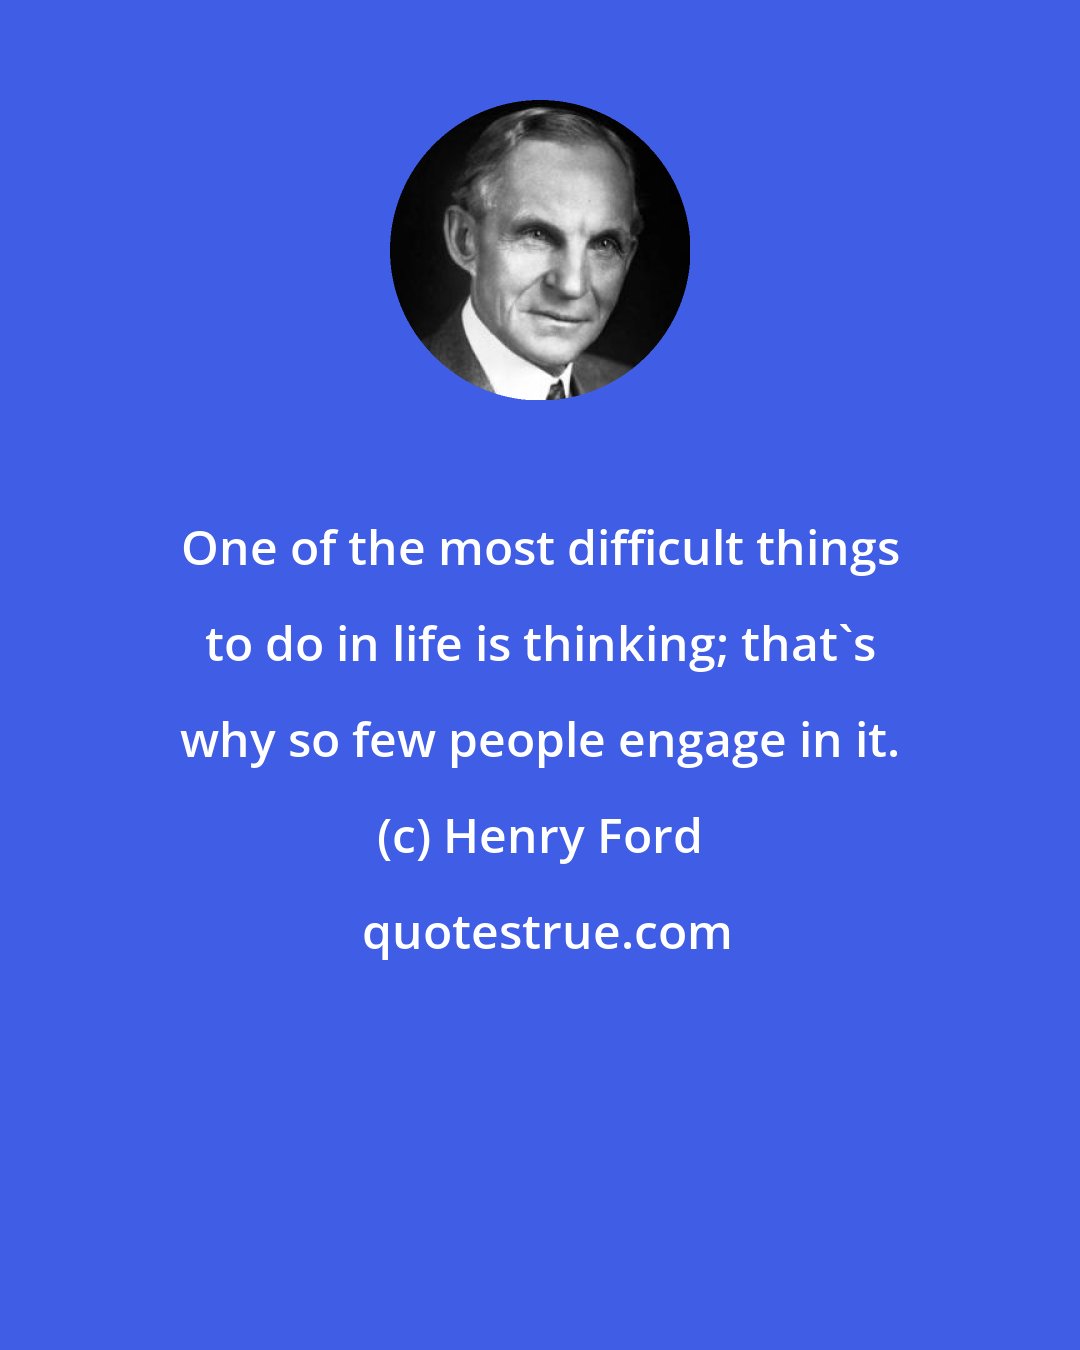 Henry Ford: One of the most difficult things to do in life is thinking; that's why so few people engage in it.